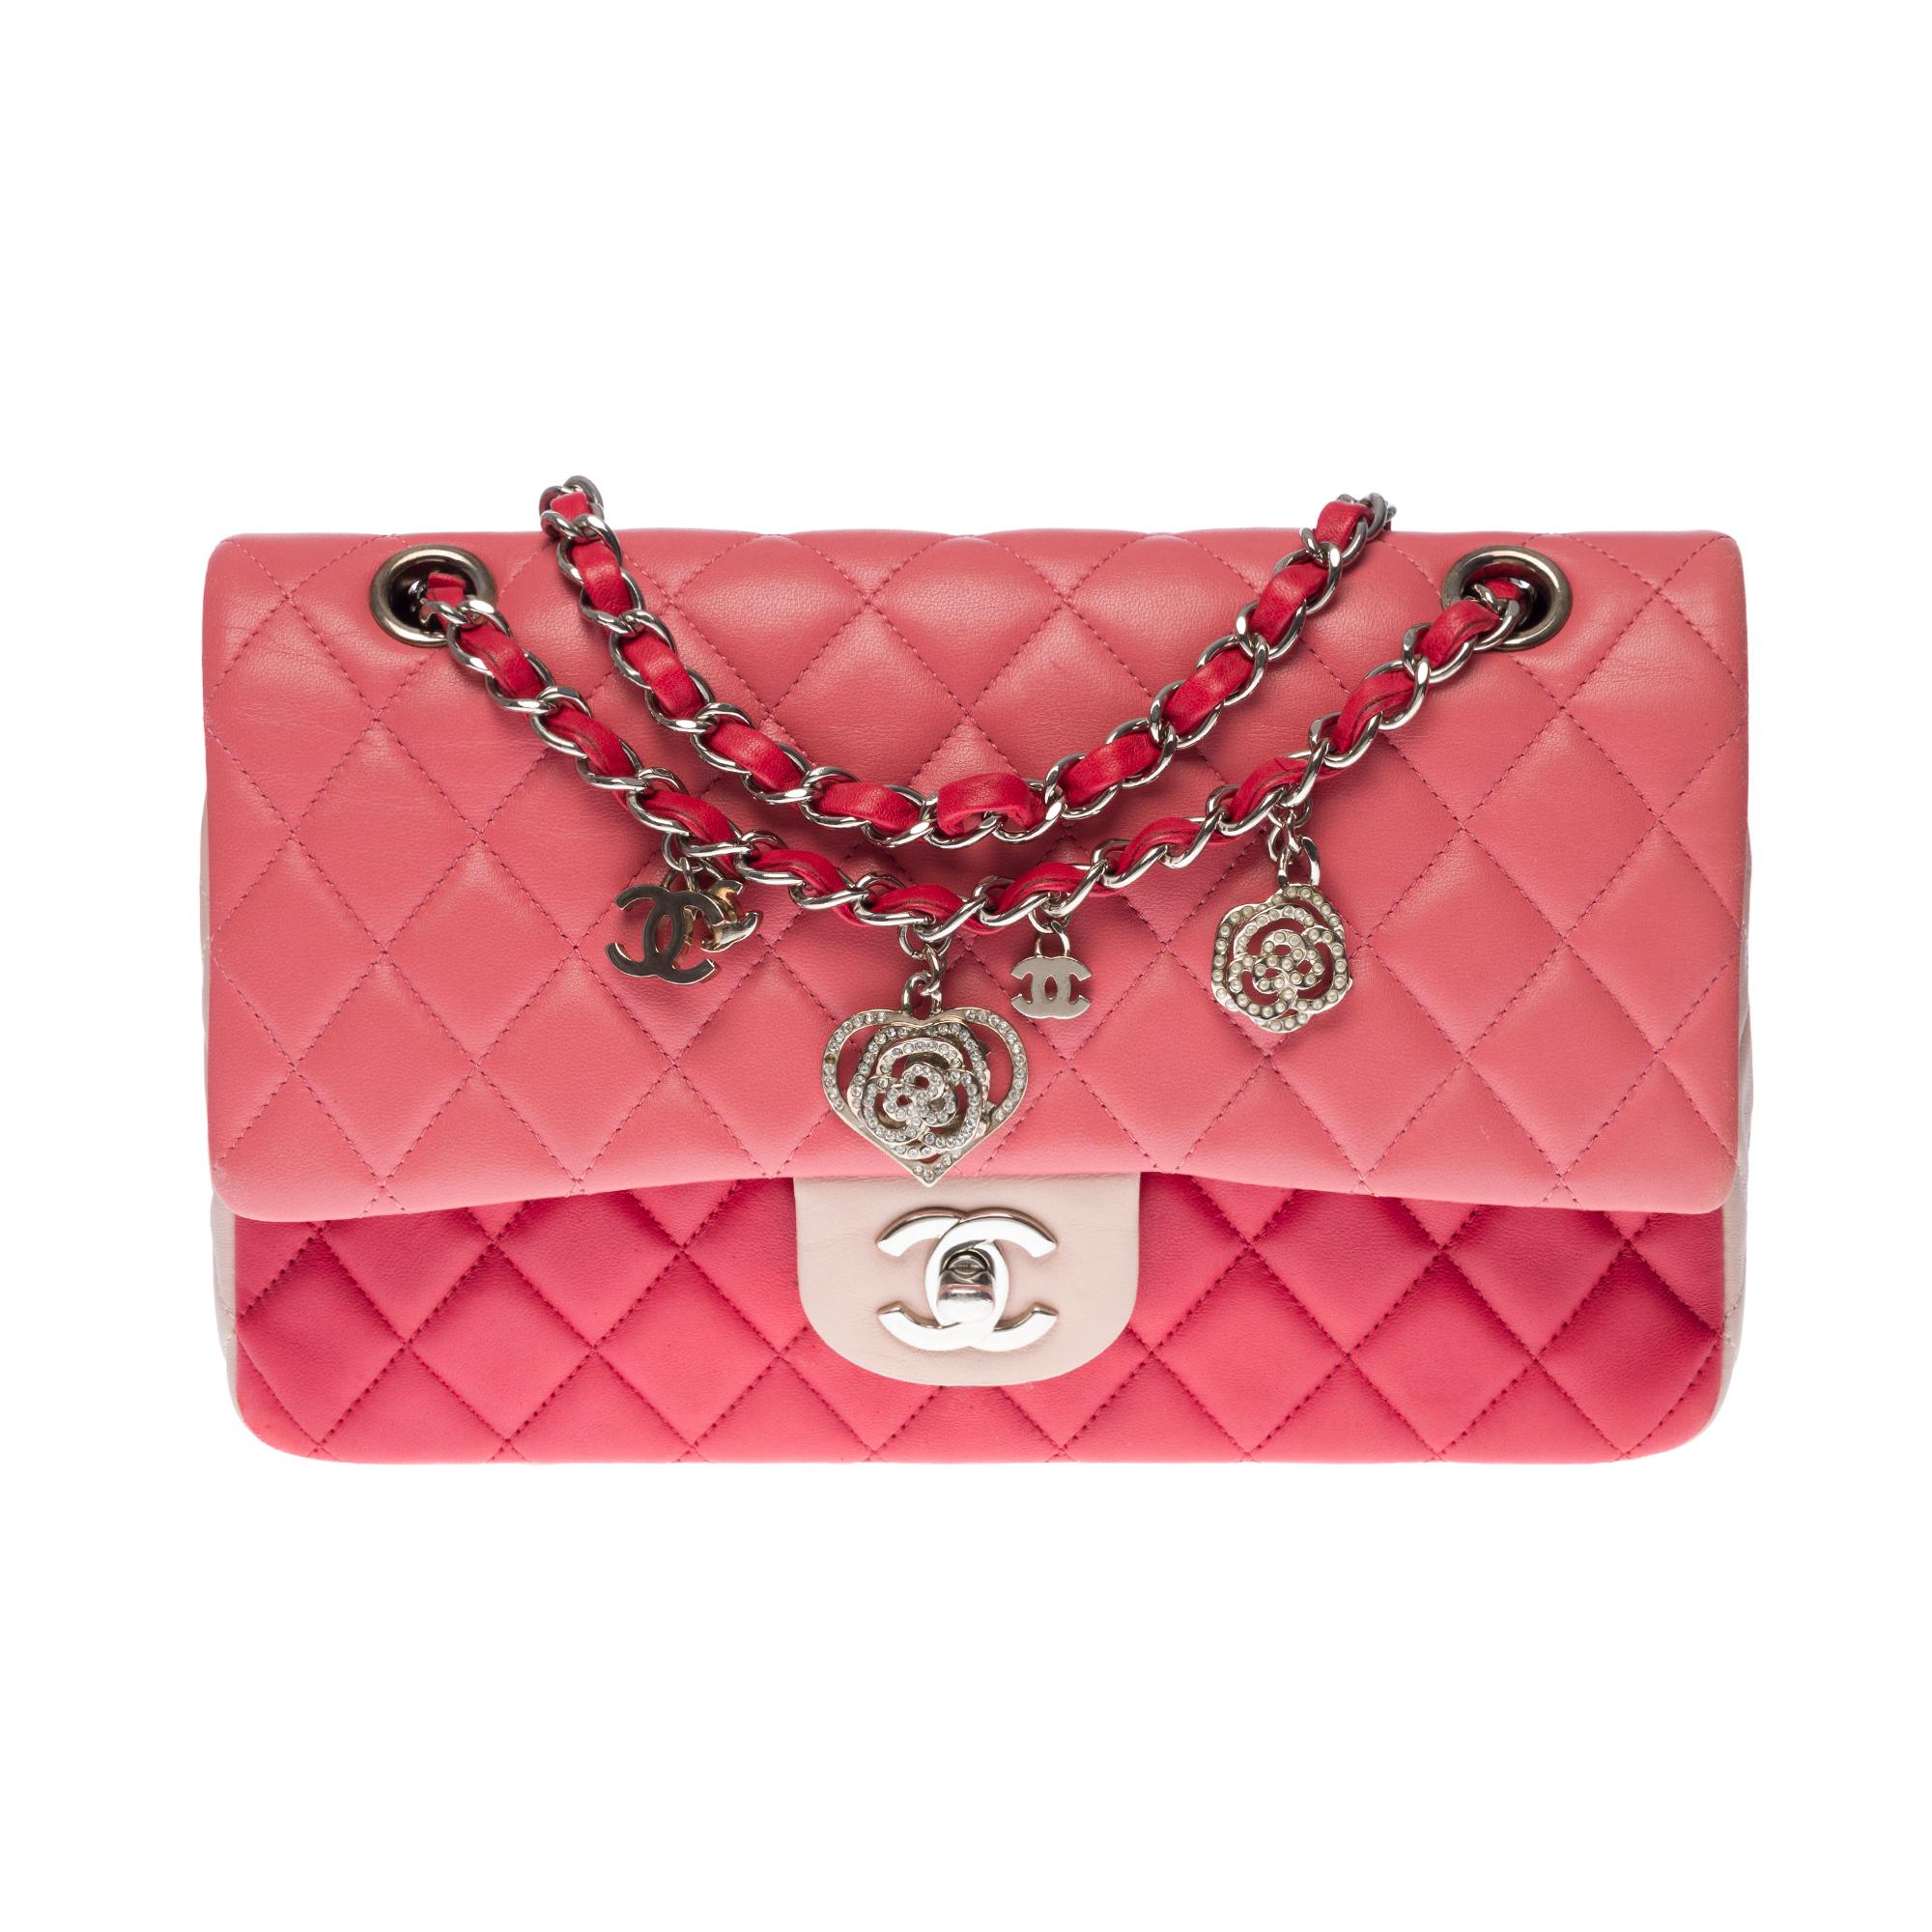 Pink Quilted Lambskin Chanel Limited Tricolor Medium Valentine Crystal Hearts Classic Flap Bag. 

Features three shades of pink lambskin, leather woven chain strap, CC turn lock closure, pink interior with zippered and slip pockets, back exterior